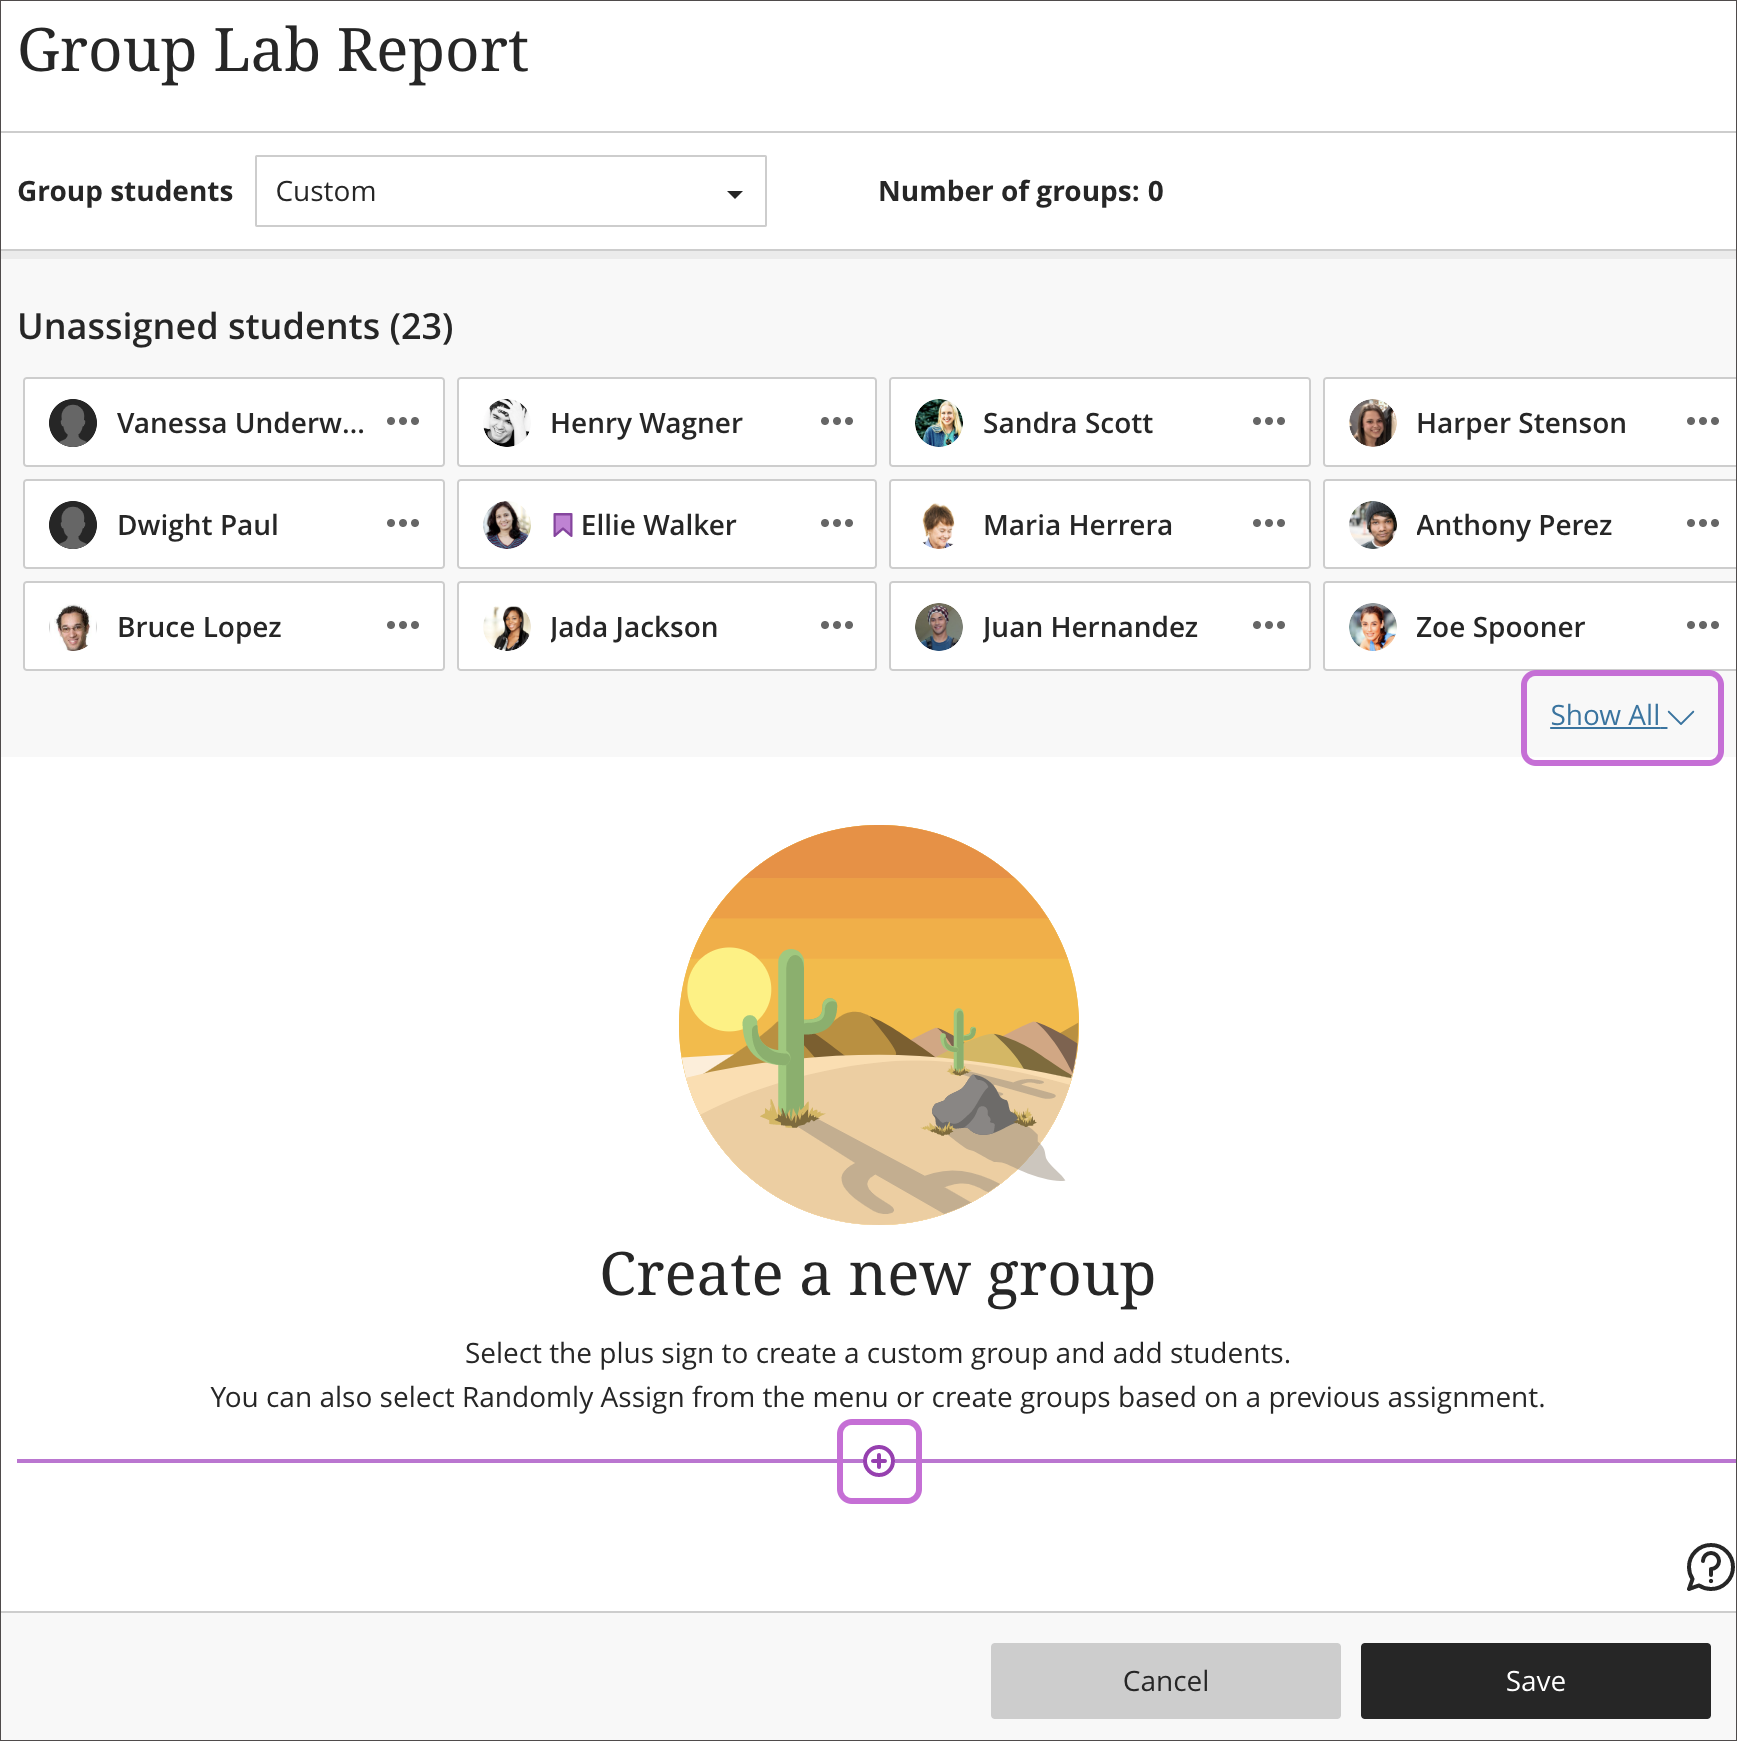 The Groups page is open with 1) the Unassigned students section on screen, 2) the "Shown all" button clicked, and 3) the plus sign for creating a new group selected. 